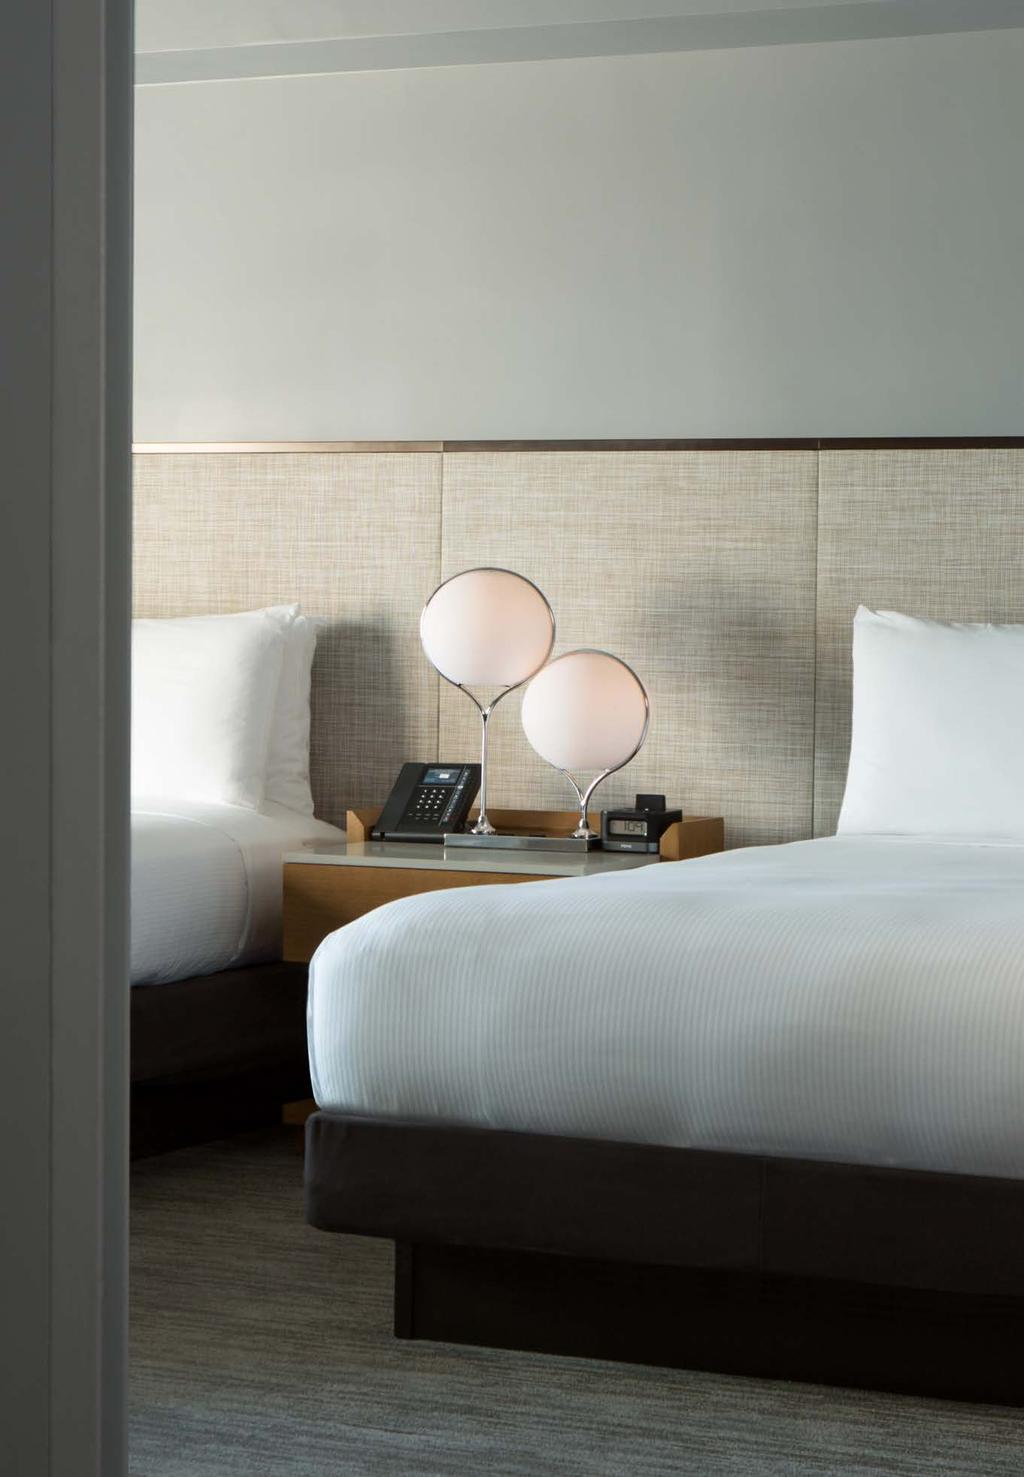 Every guestroom and suite at each hotel are held to these high standards to provide everything your attendees need for restful nights and productive days.